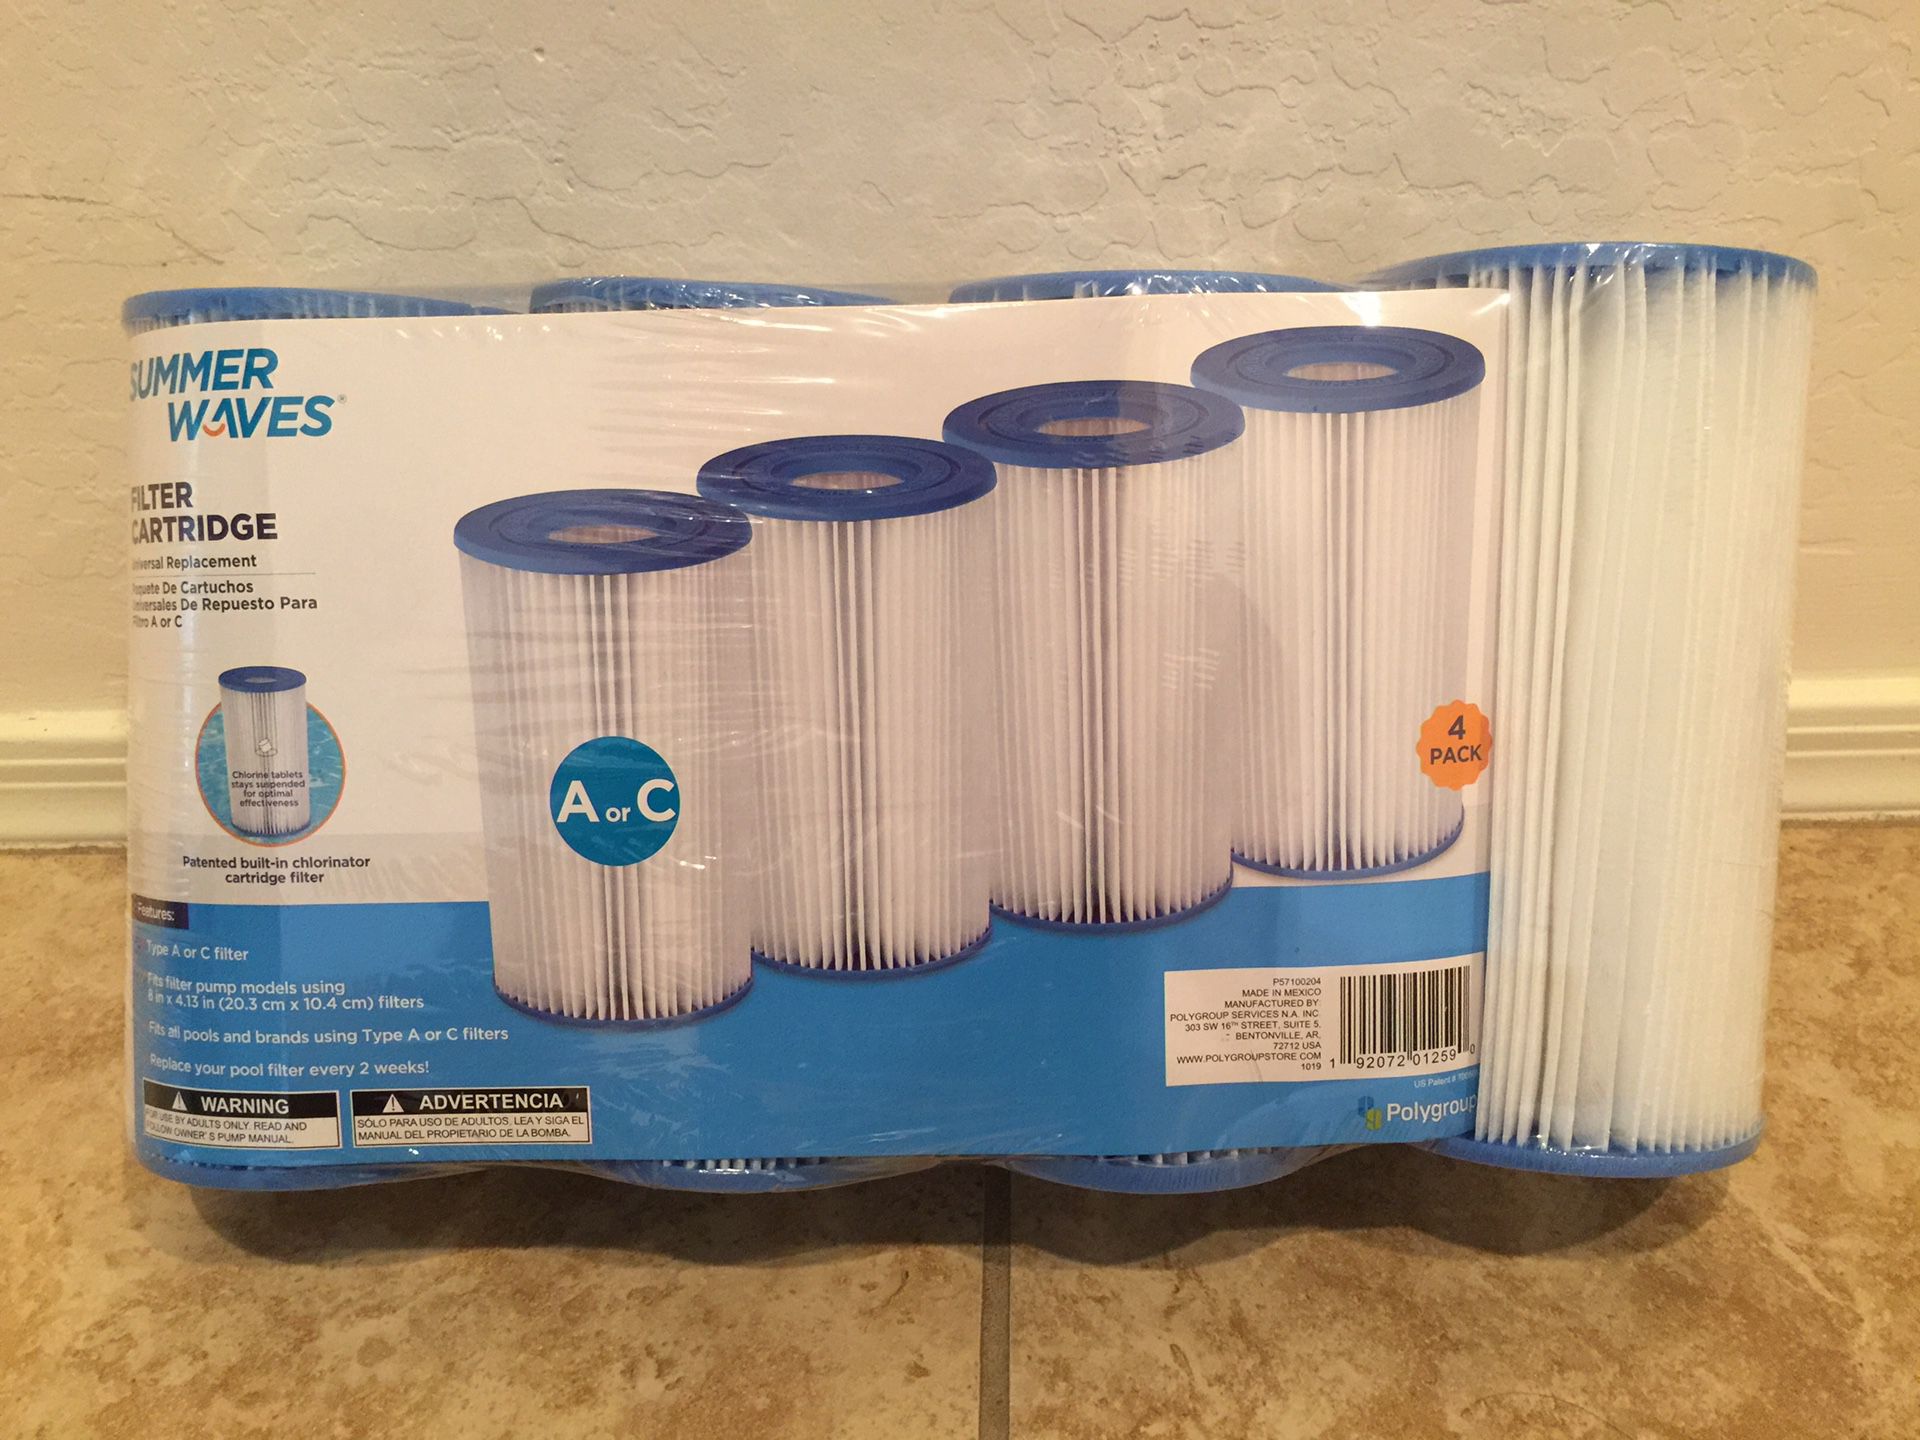 4-Pack Summer Waves A or C Filter Cartridge